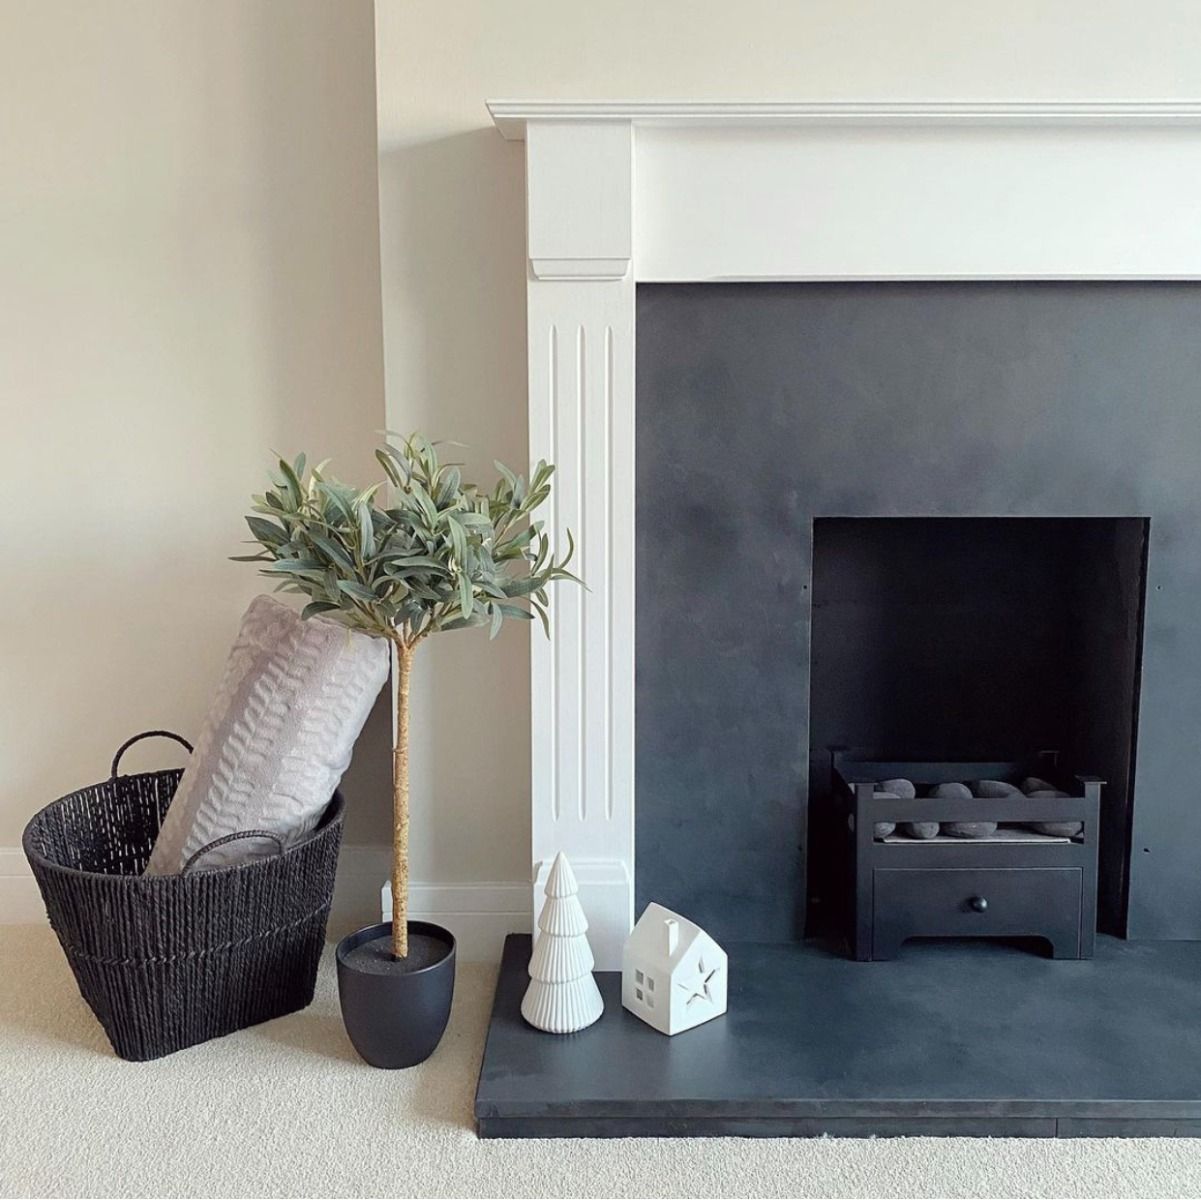 Small black bioethanol fireplace in a traditional black and white insert